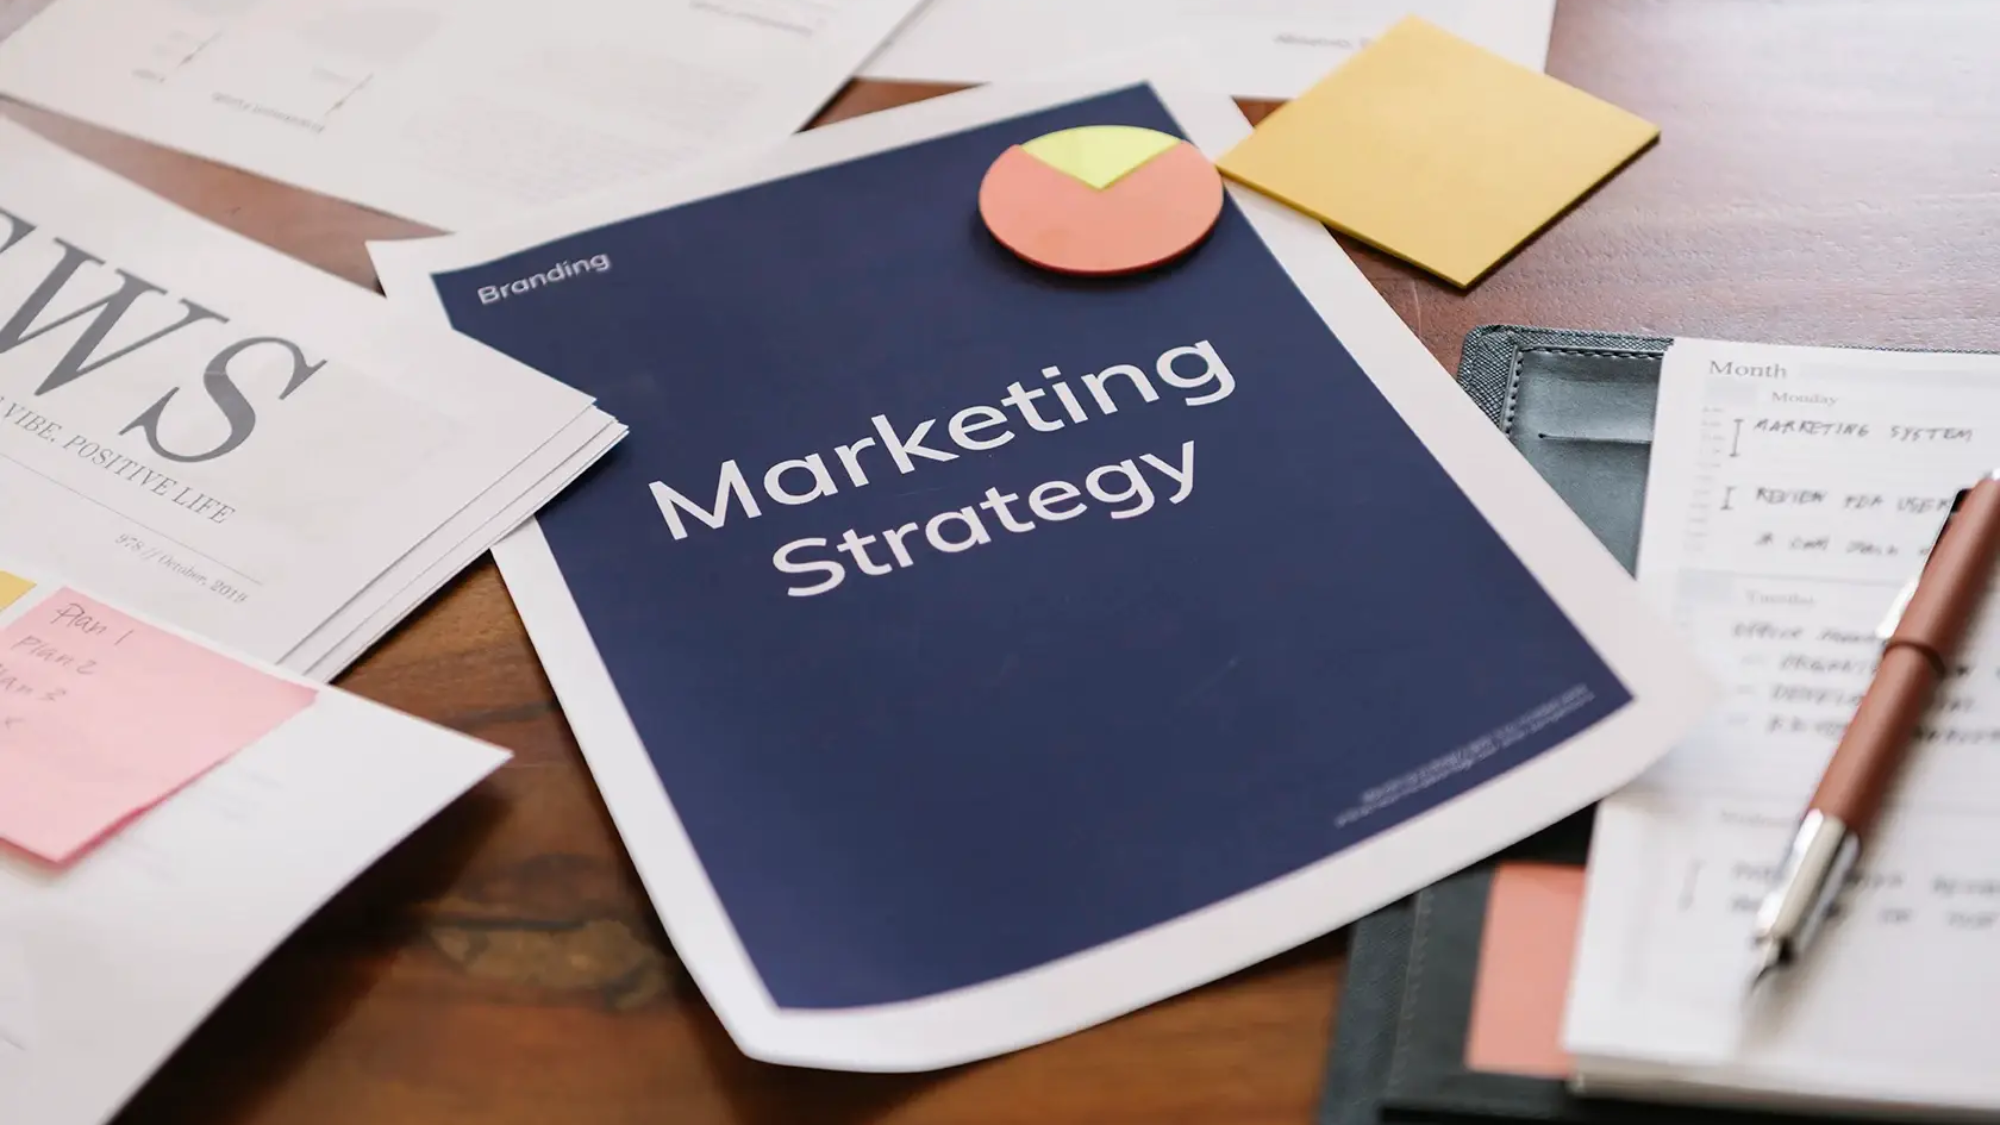 Building materials marketing strategy concept with a digital marketing plan on a desk.